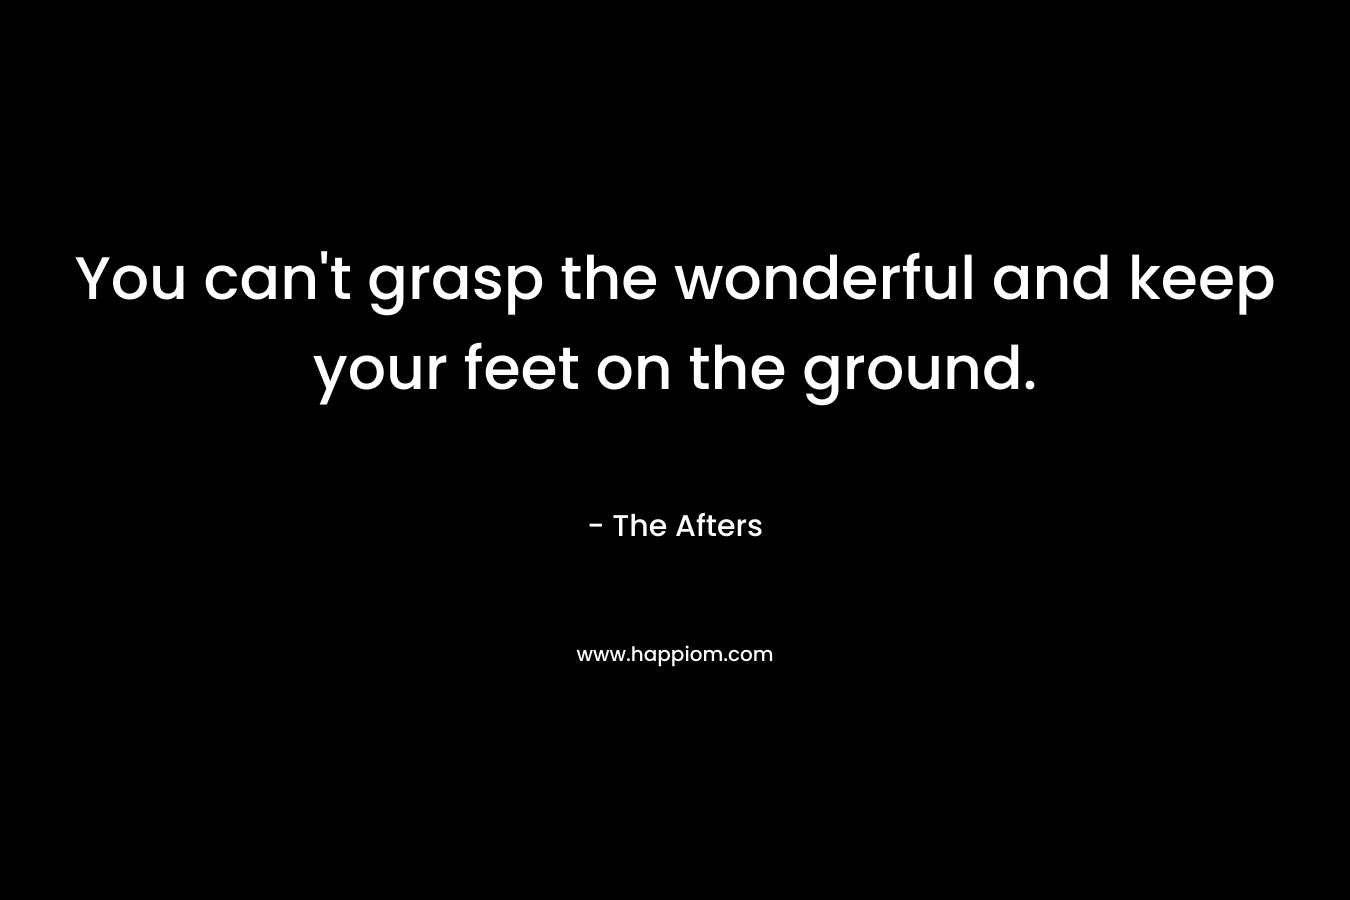 You can't grasp the wonderful and keep your feet on the ground.